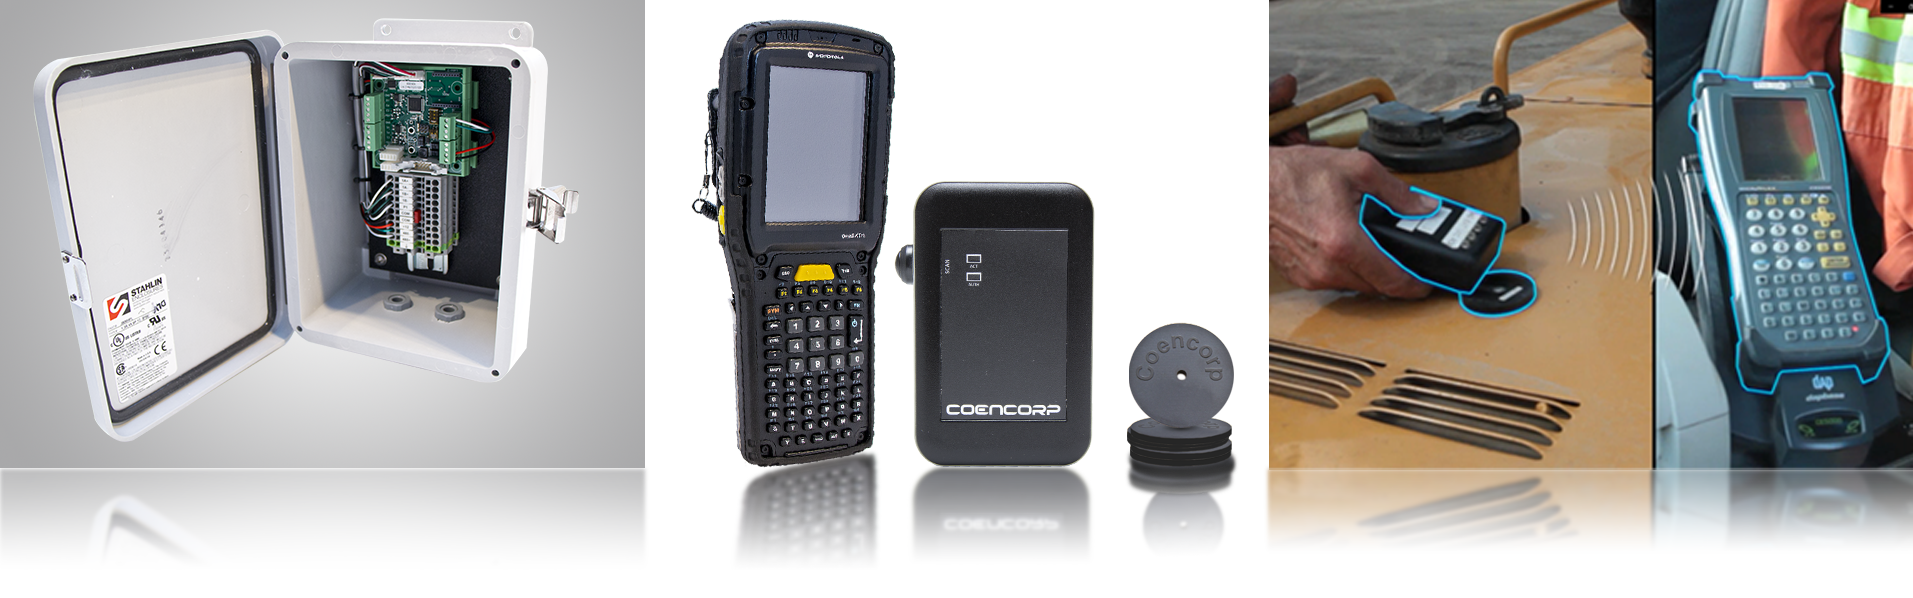 Various electronic hardware peripherals for Coencorp's SM2 Mobile Fuel management system